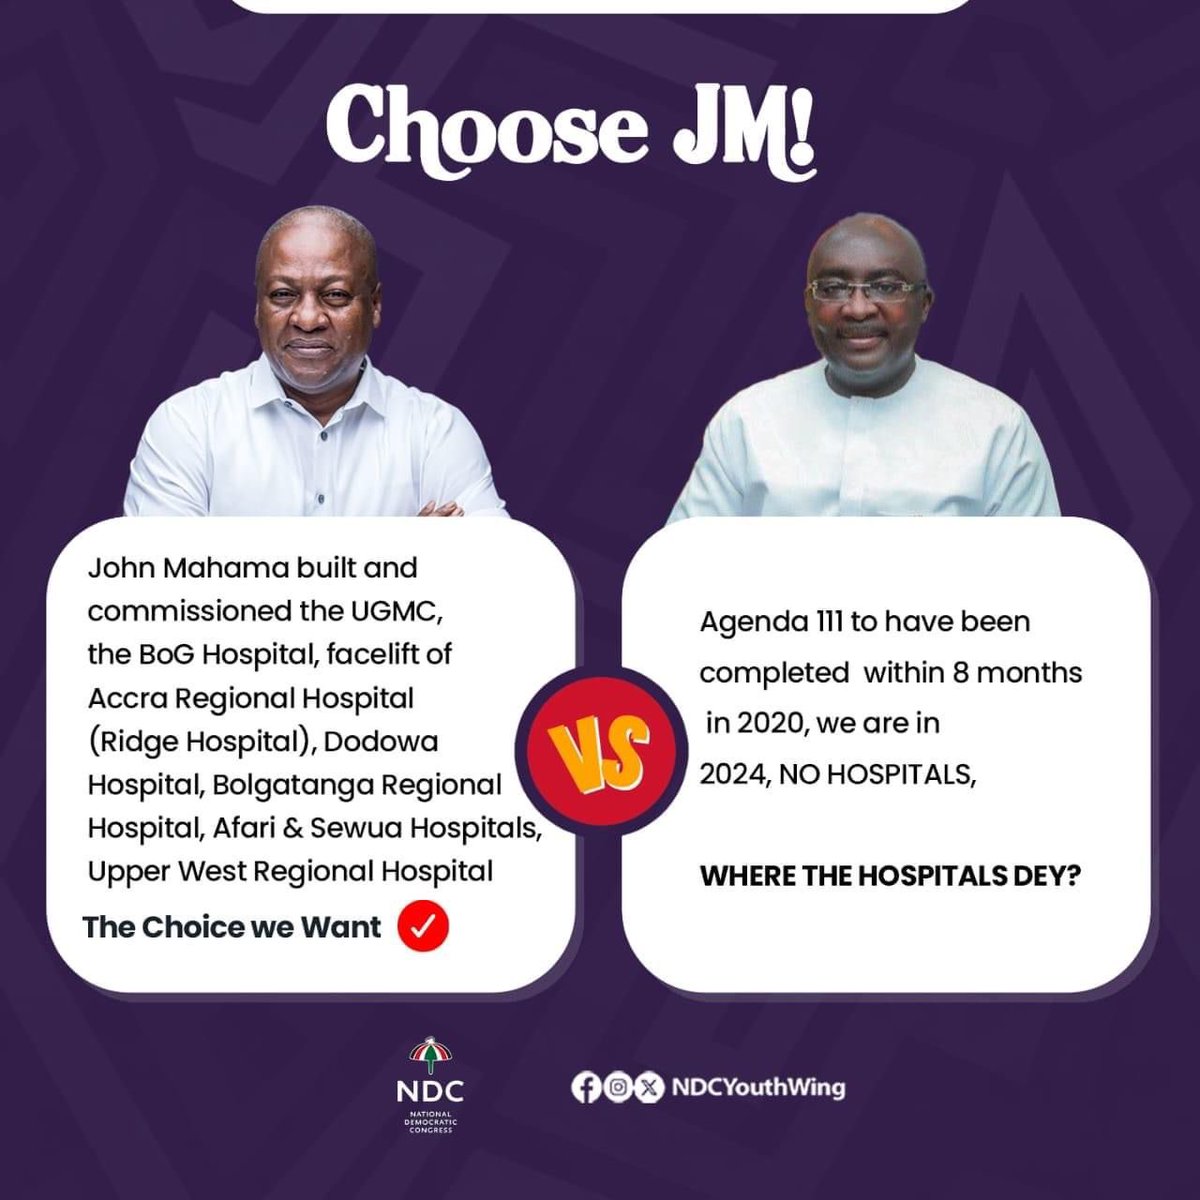 Choose between truth and progress versus lies, incompetence, and failed promises. Be the judge and choose JM. #ChangeIsComing